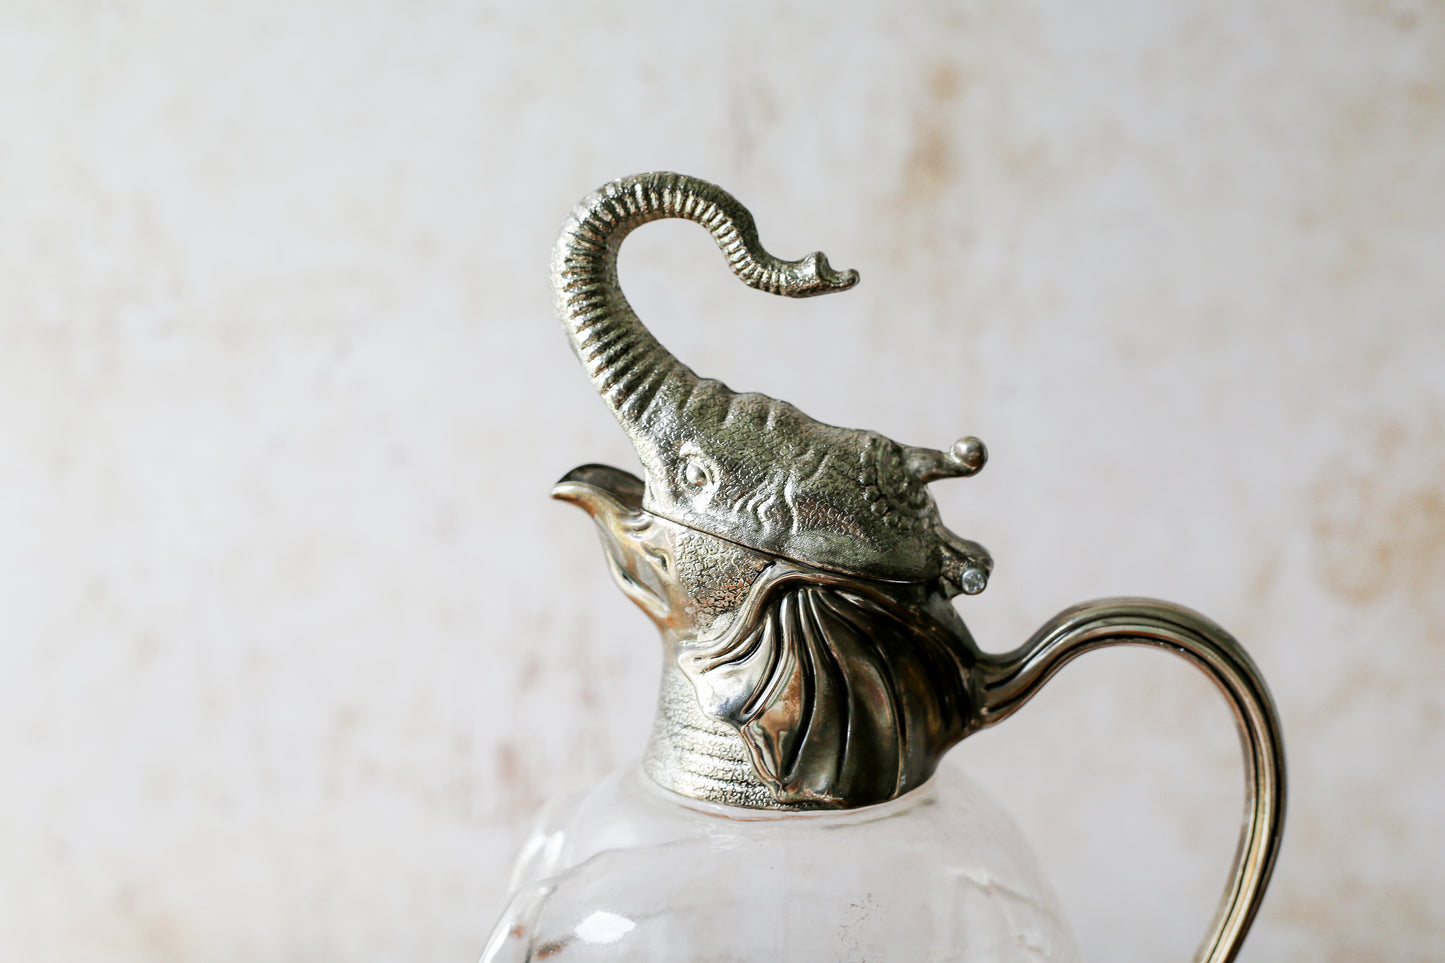 Vintage Glass and Silver Plate Elephant Shaped Pitcher